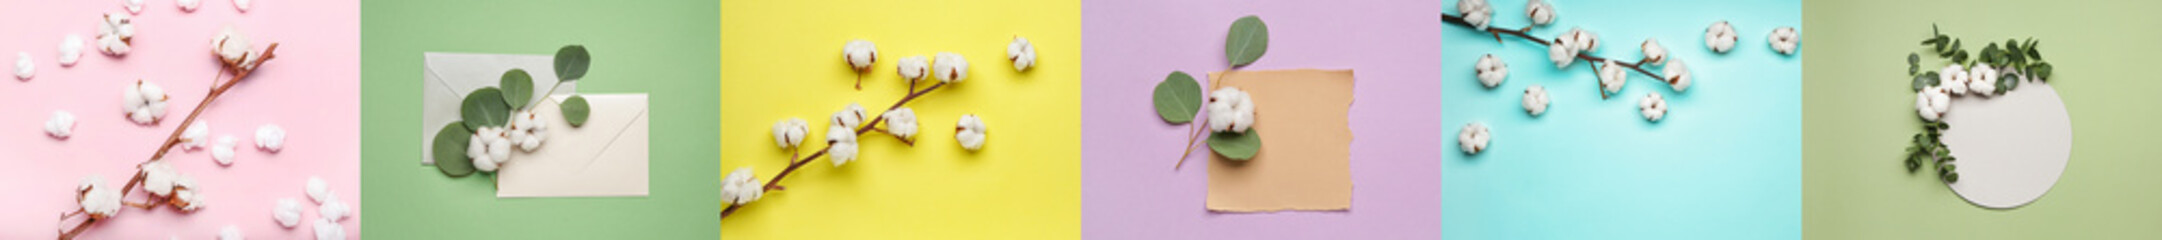 Collage of soft cotton flowers on color background